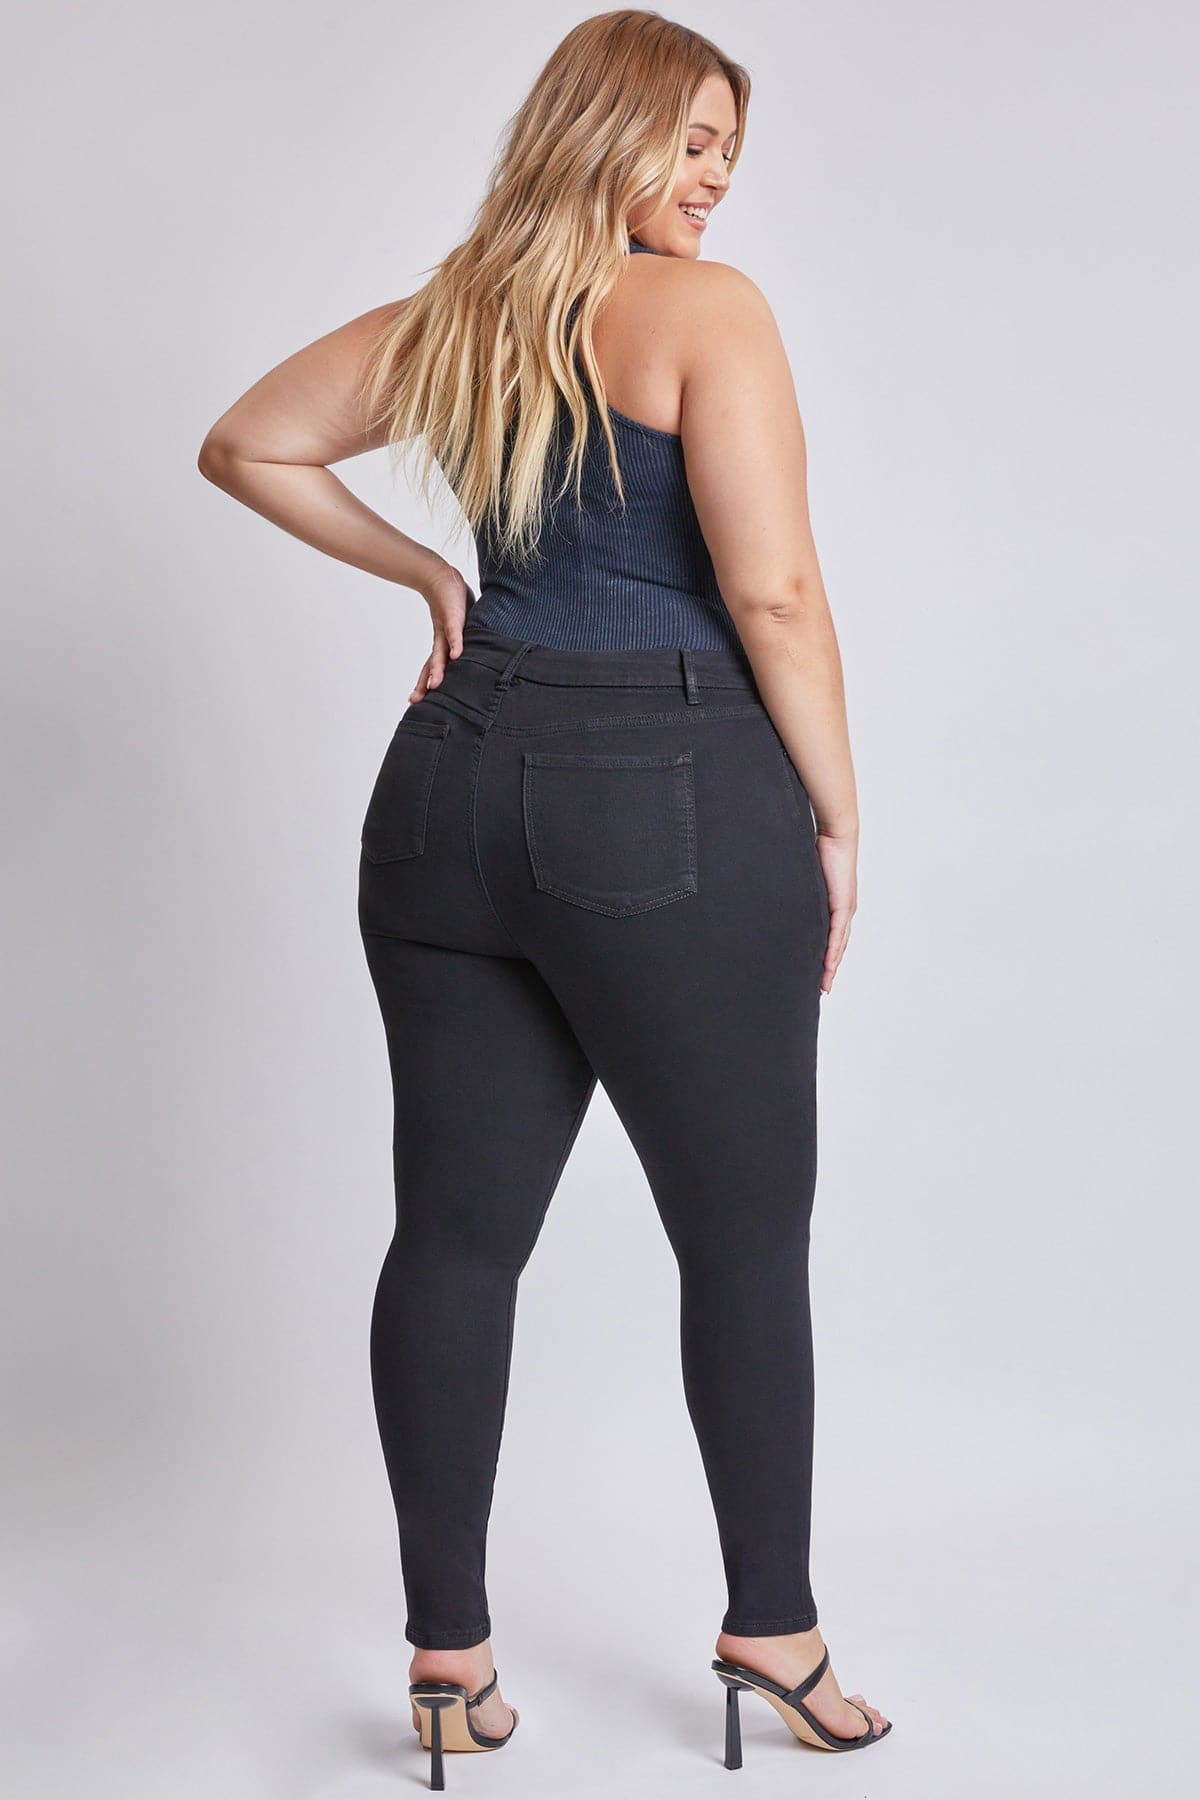 Plus Size Women's Sustainable Curvy Fit  Skinny Jeans